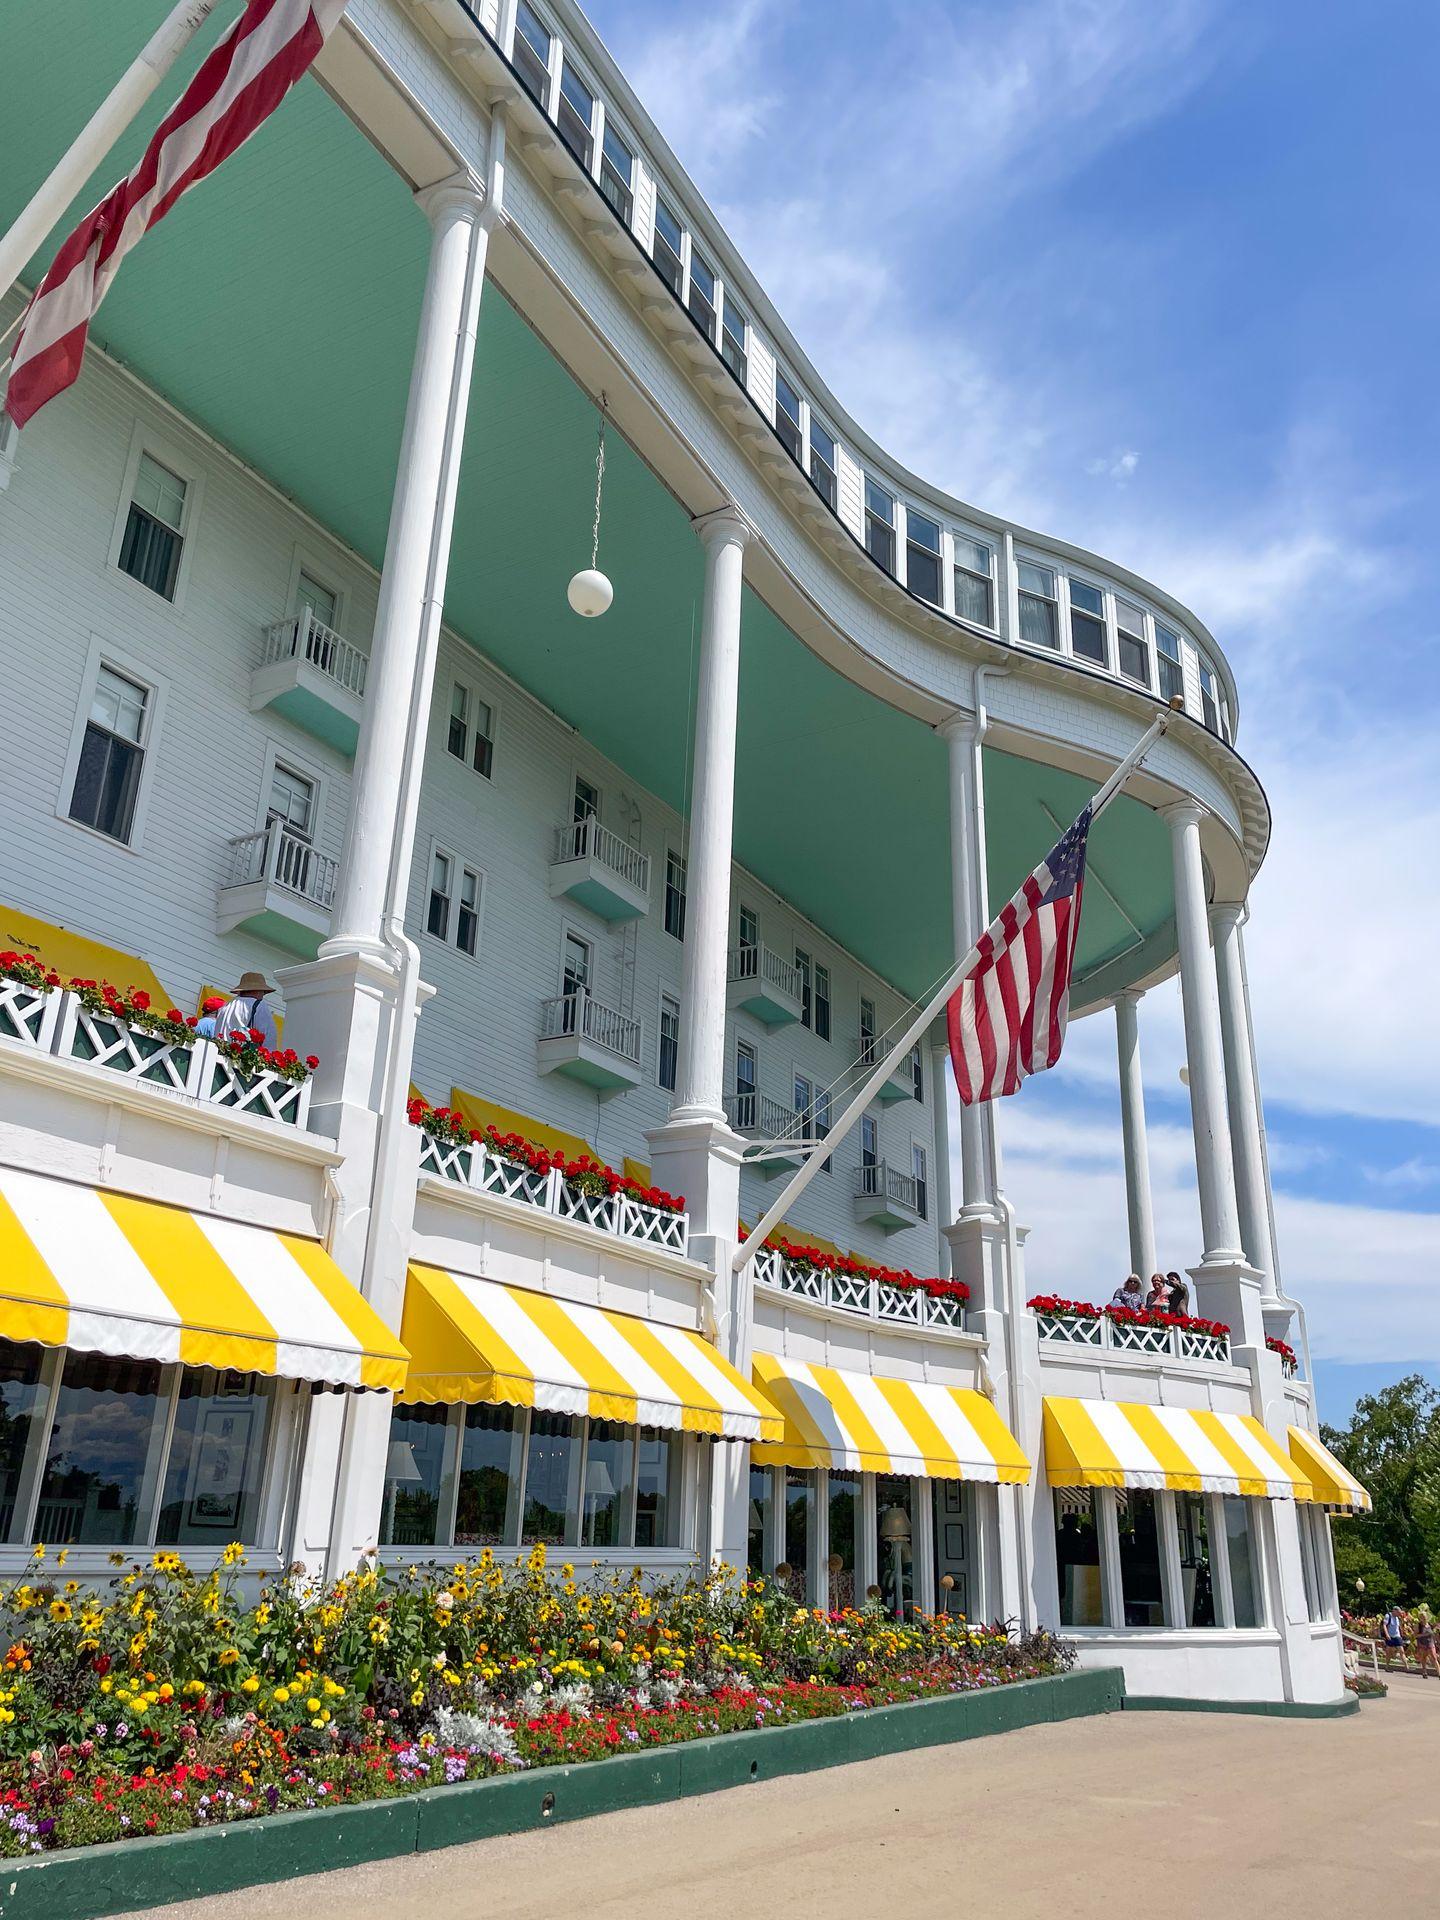 The front porch of the Grand Hotel. It's a white building with columns and yellow and white straped awnings. There are colorful flowers out front and American flags attached to the building.